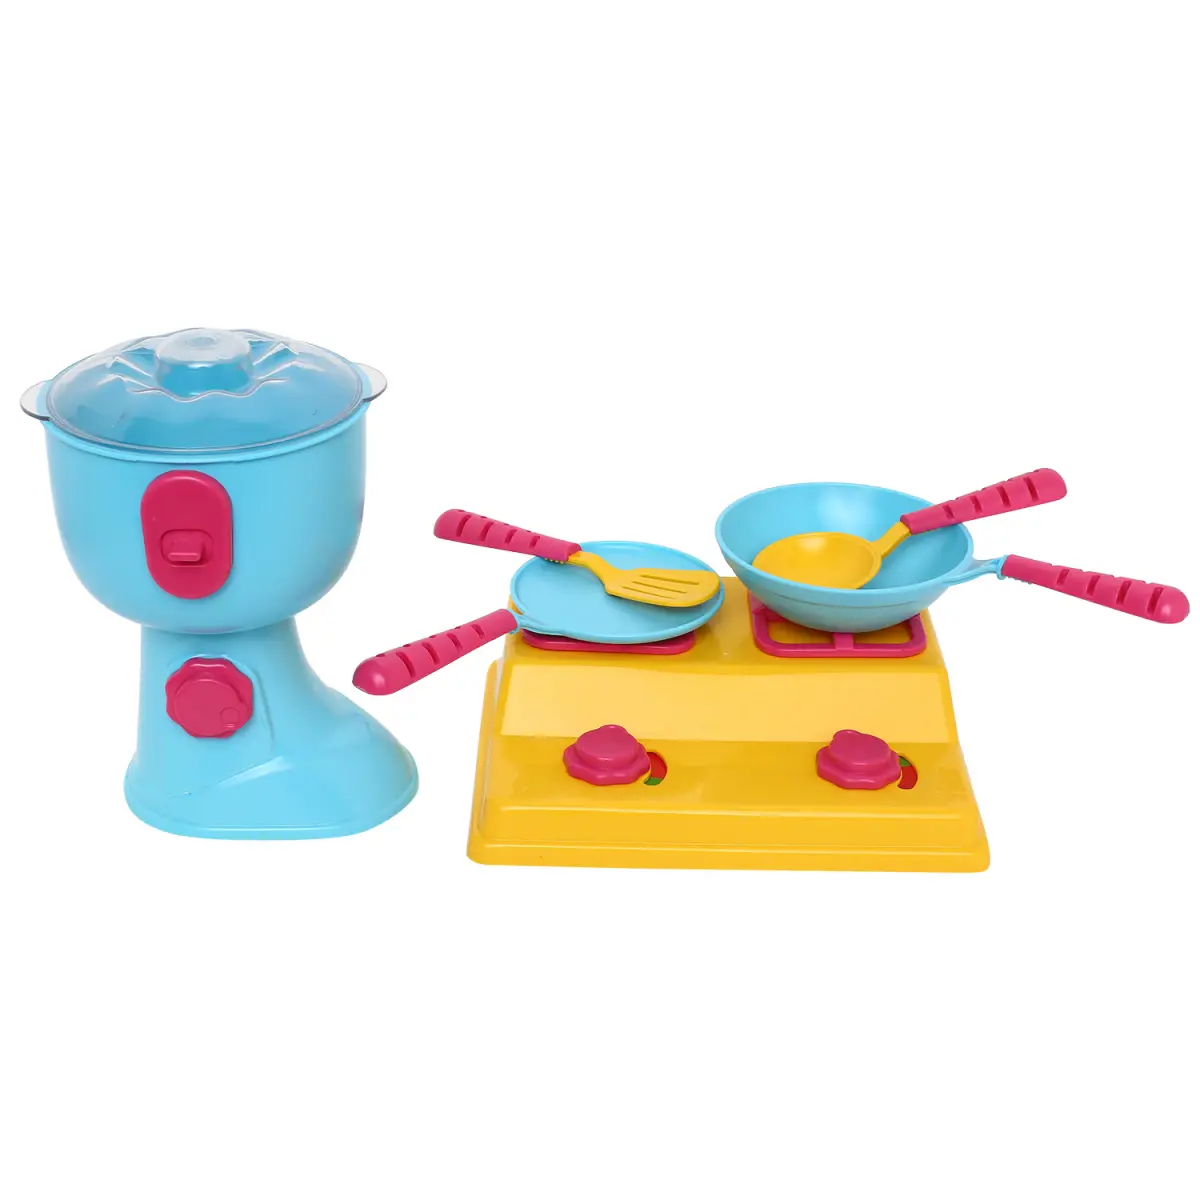 Giggles Kitchen Set Deluxe, Multi Color & Appliances for Kids age 3Y+ 